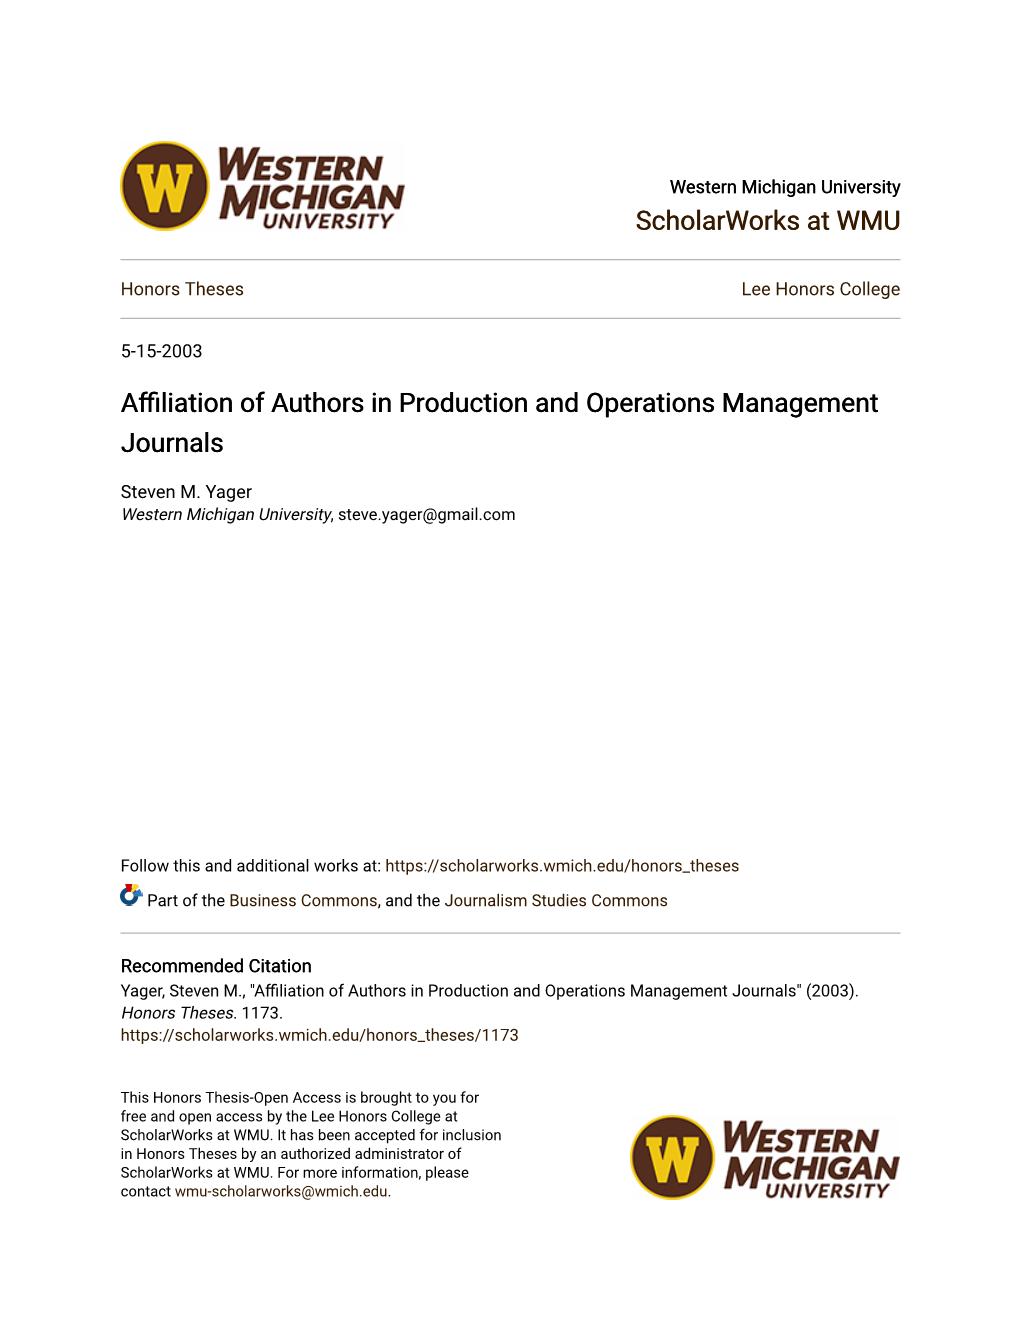 Affiliation of Authors in Production and Operations Management Journals" (2003)